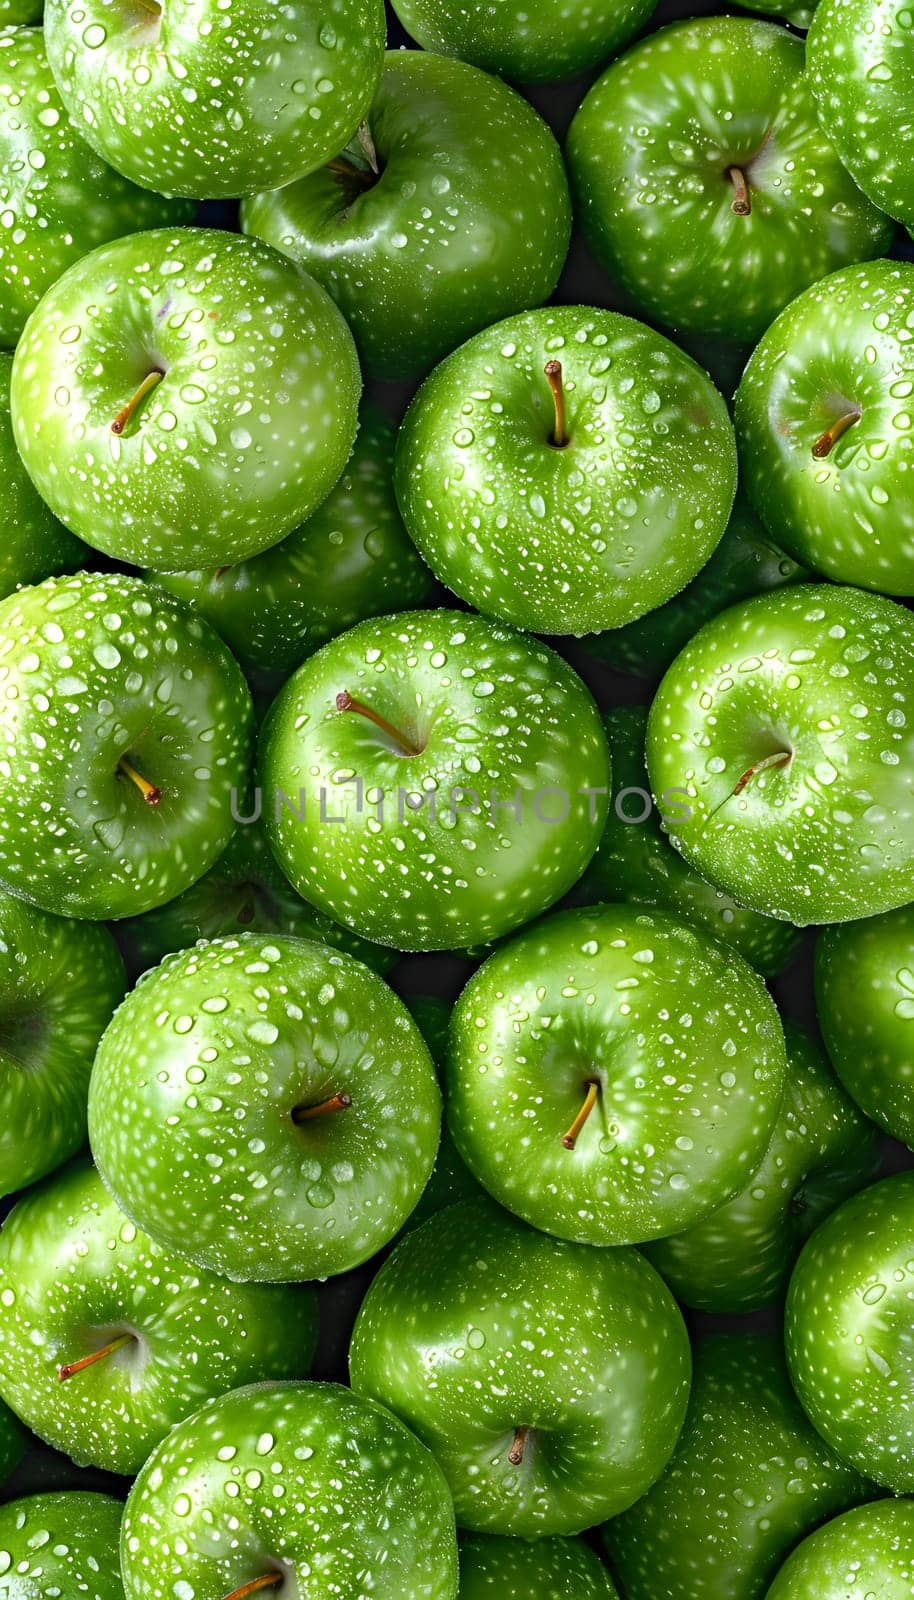 A pile of green apples, a seedless fruit, with water drops on them. They are natural foods, whole foods, and ingredients from a terrestrial plant organism